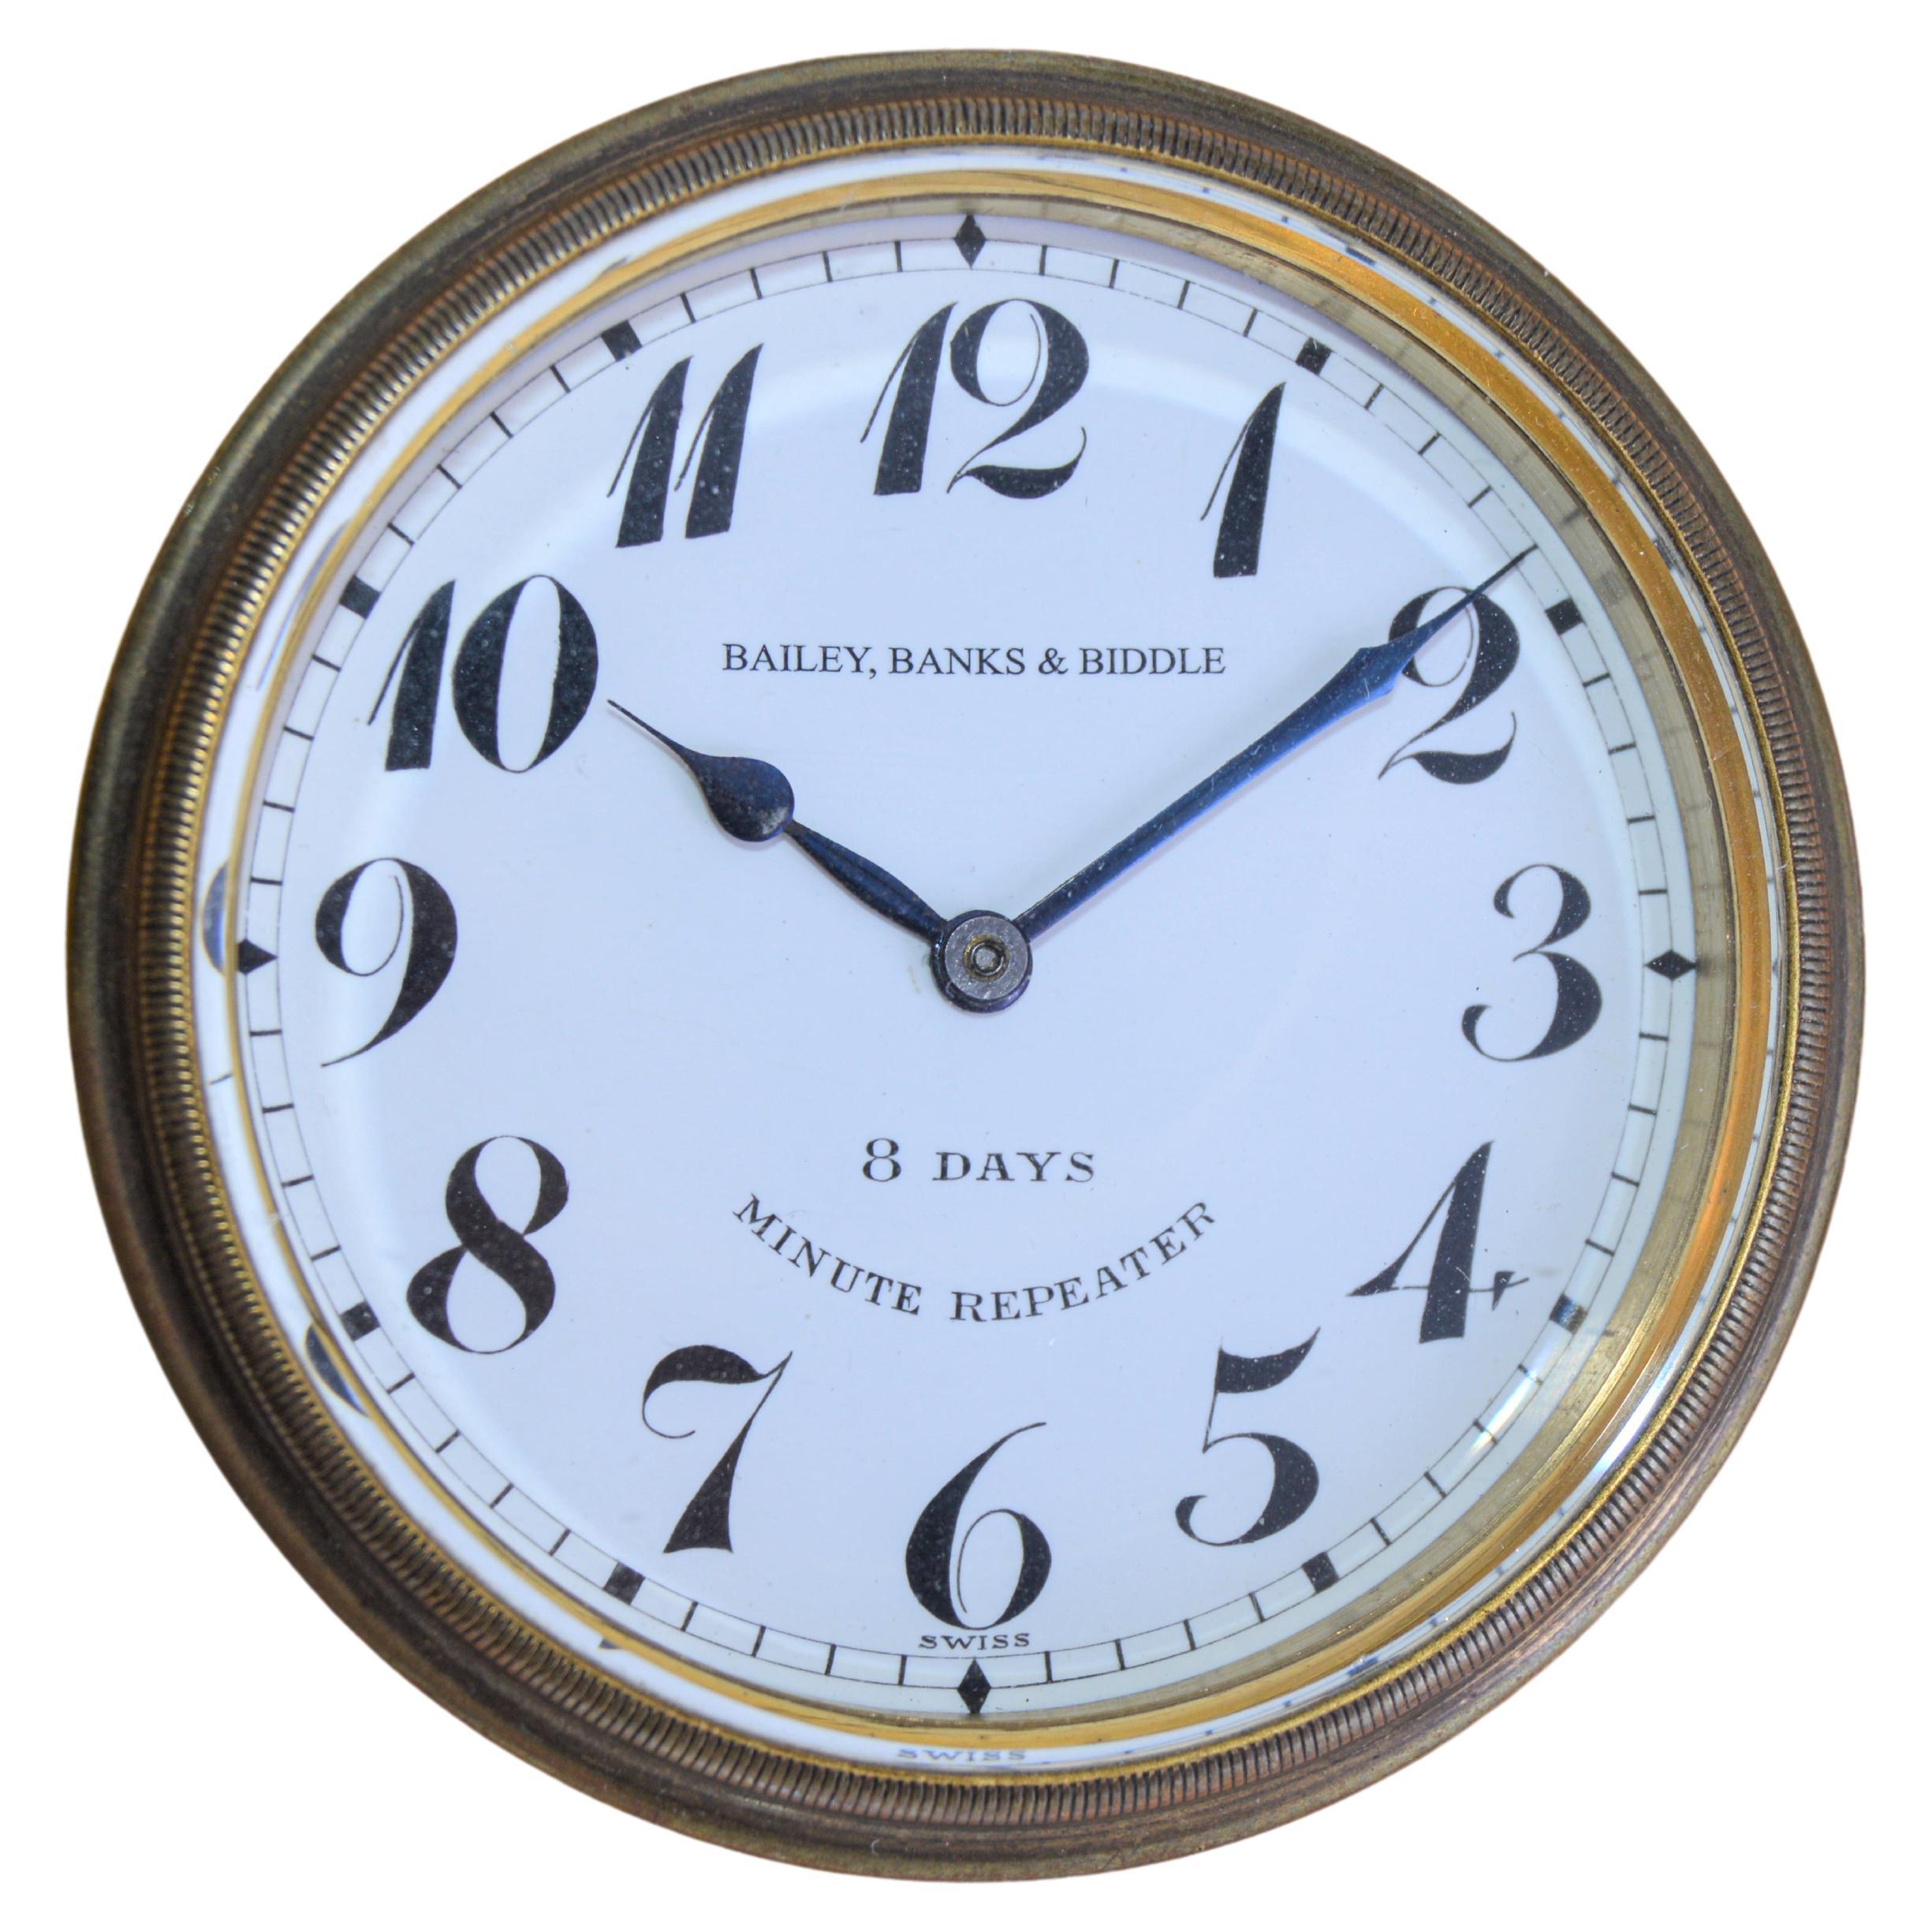 FACTORY / HOUSE: Bailey, Banks & Biddle
STYLE / REFERENCE: Art Deco / 8 Day Clock
METAL / MATERIAL:
CIRCA / YEAR:
DIMENSIONS / SIZE: 8 Inches X 6 Inches
MOVEMENT / CALIBER: High Grade / 8 Day / 15 Jewels
DIAL / HANDS: Enamel with Luminous Numbers /